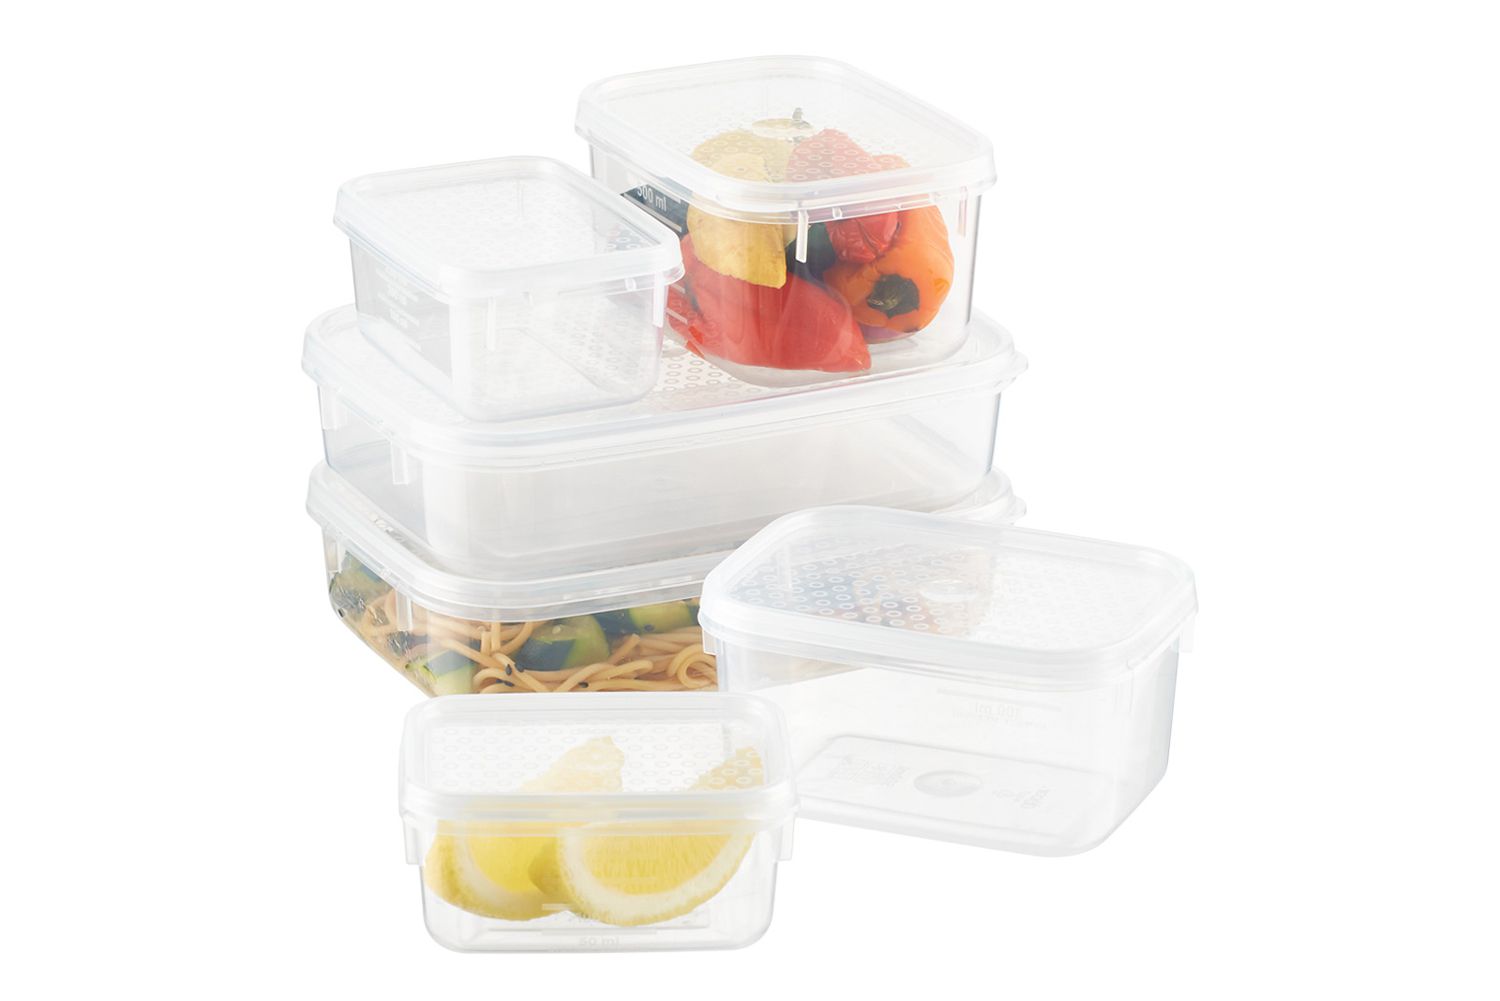 The Container Store Tellfresh Food Storage Value Pack